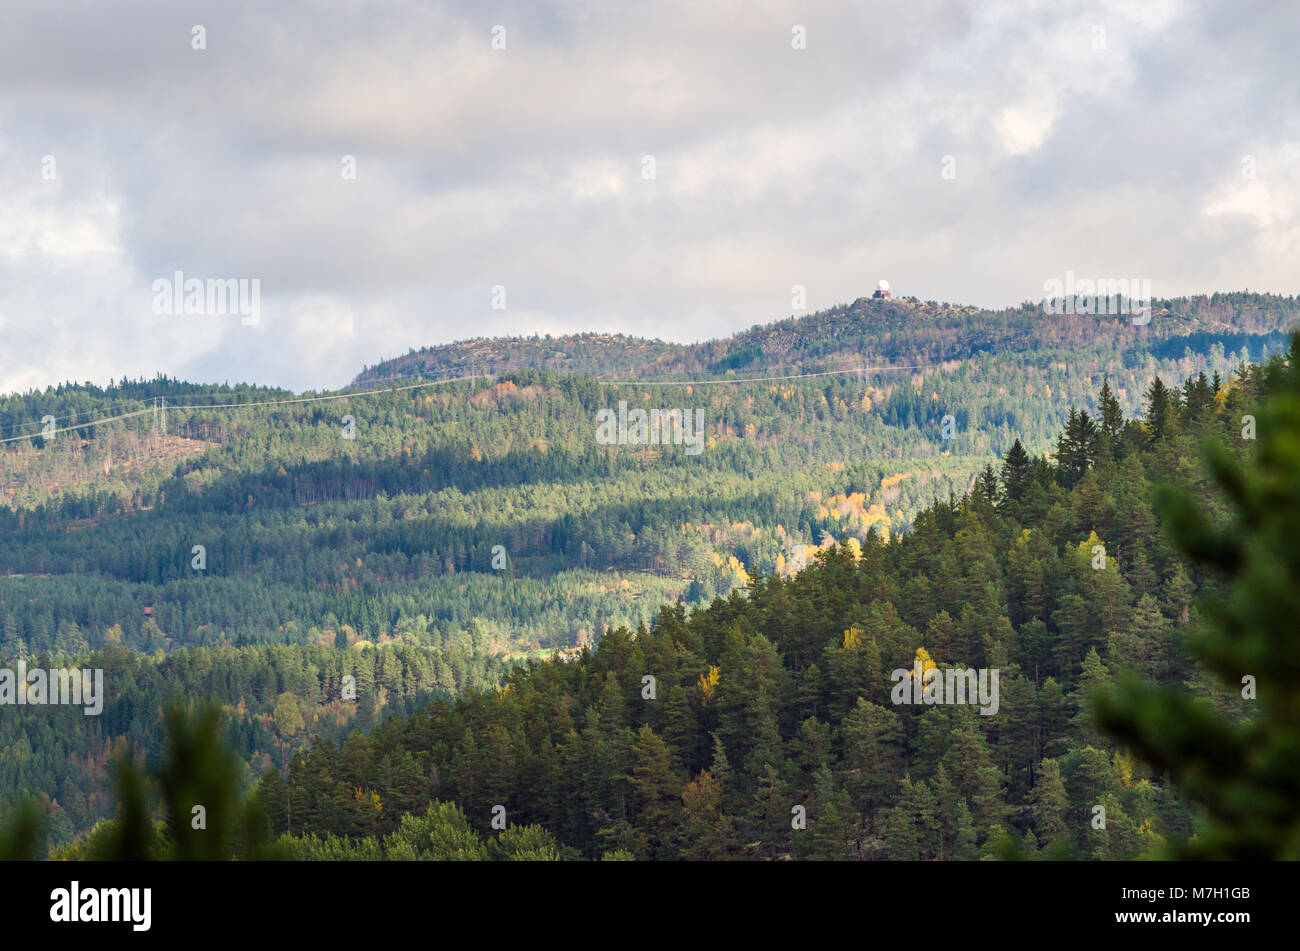 Landscape of central Norway midland with radar tower and low mountains covered by forest. Evje, middle of Norway. Stock Photo